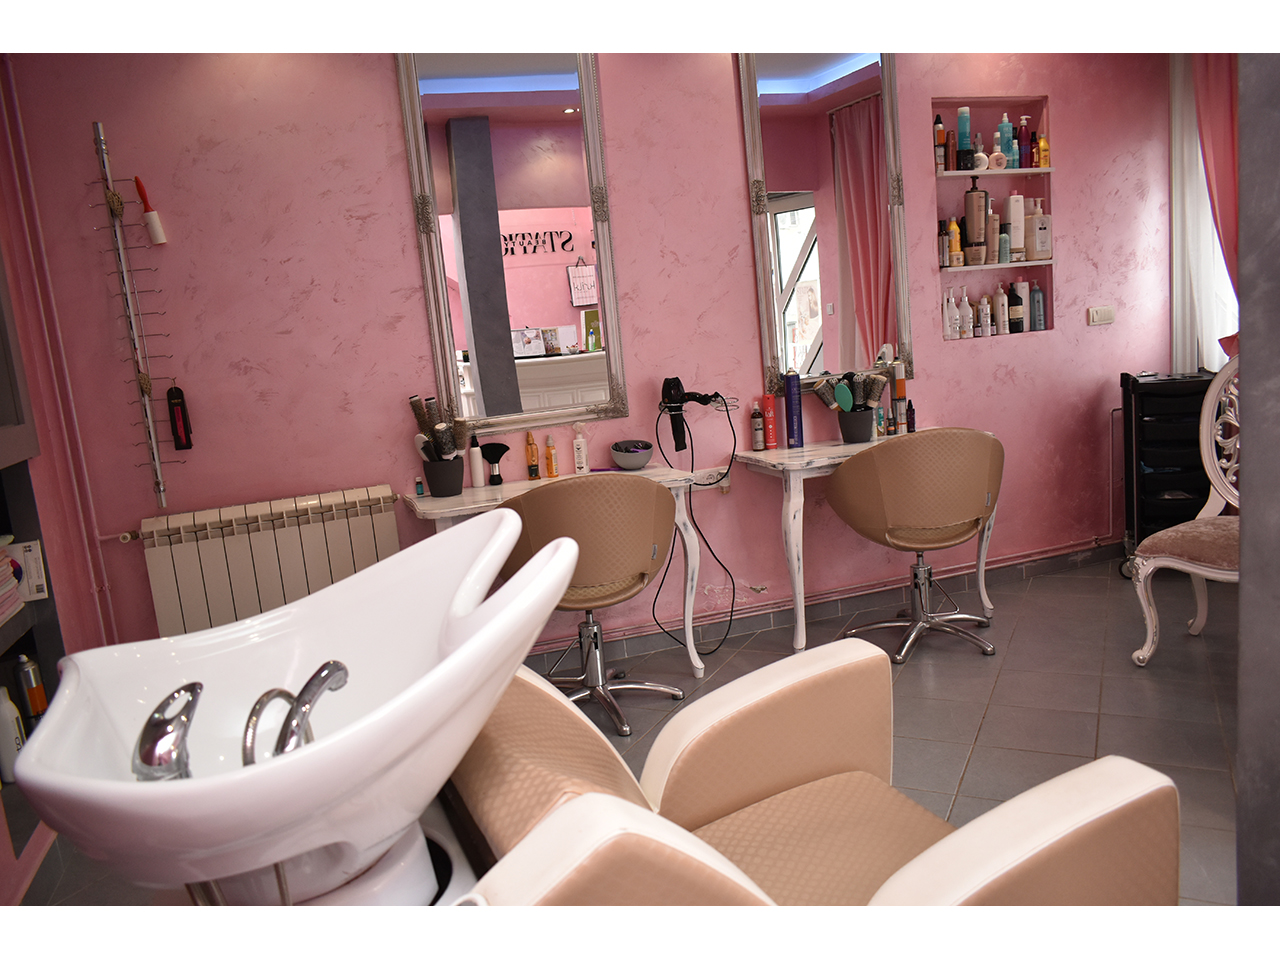 BEAUTY STATION Hairdressers Beograd